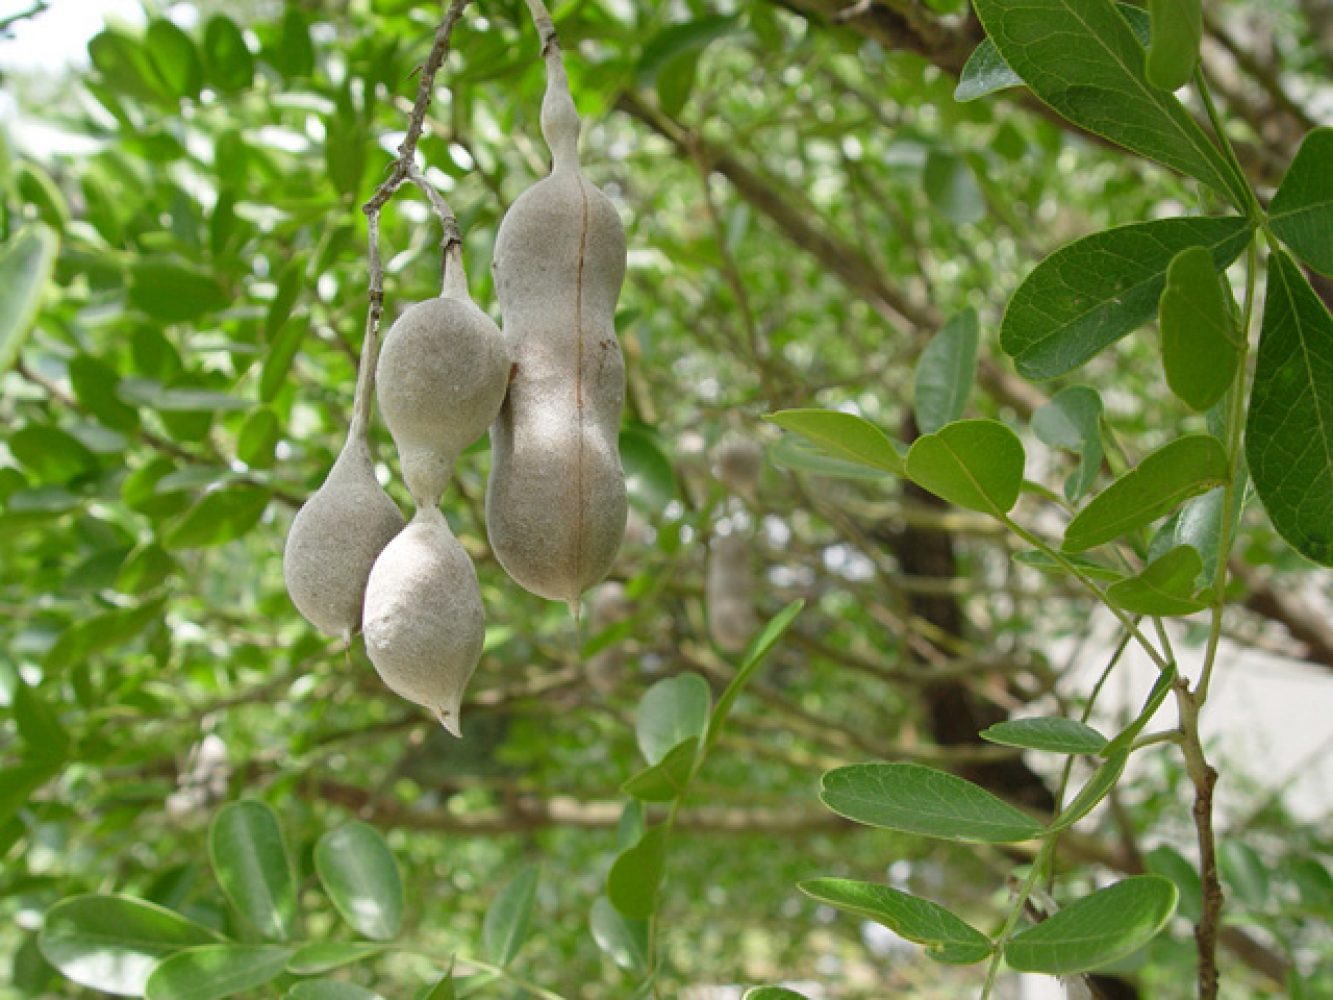 Sophora secundiflora Pods, 2003
Lytle, Melody
Wildflower Center Digital Library